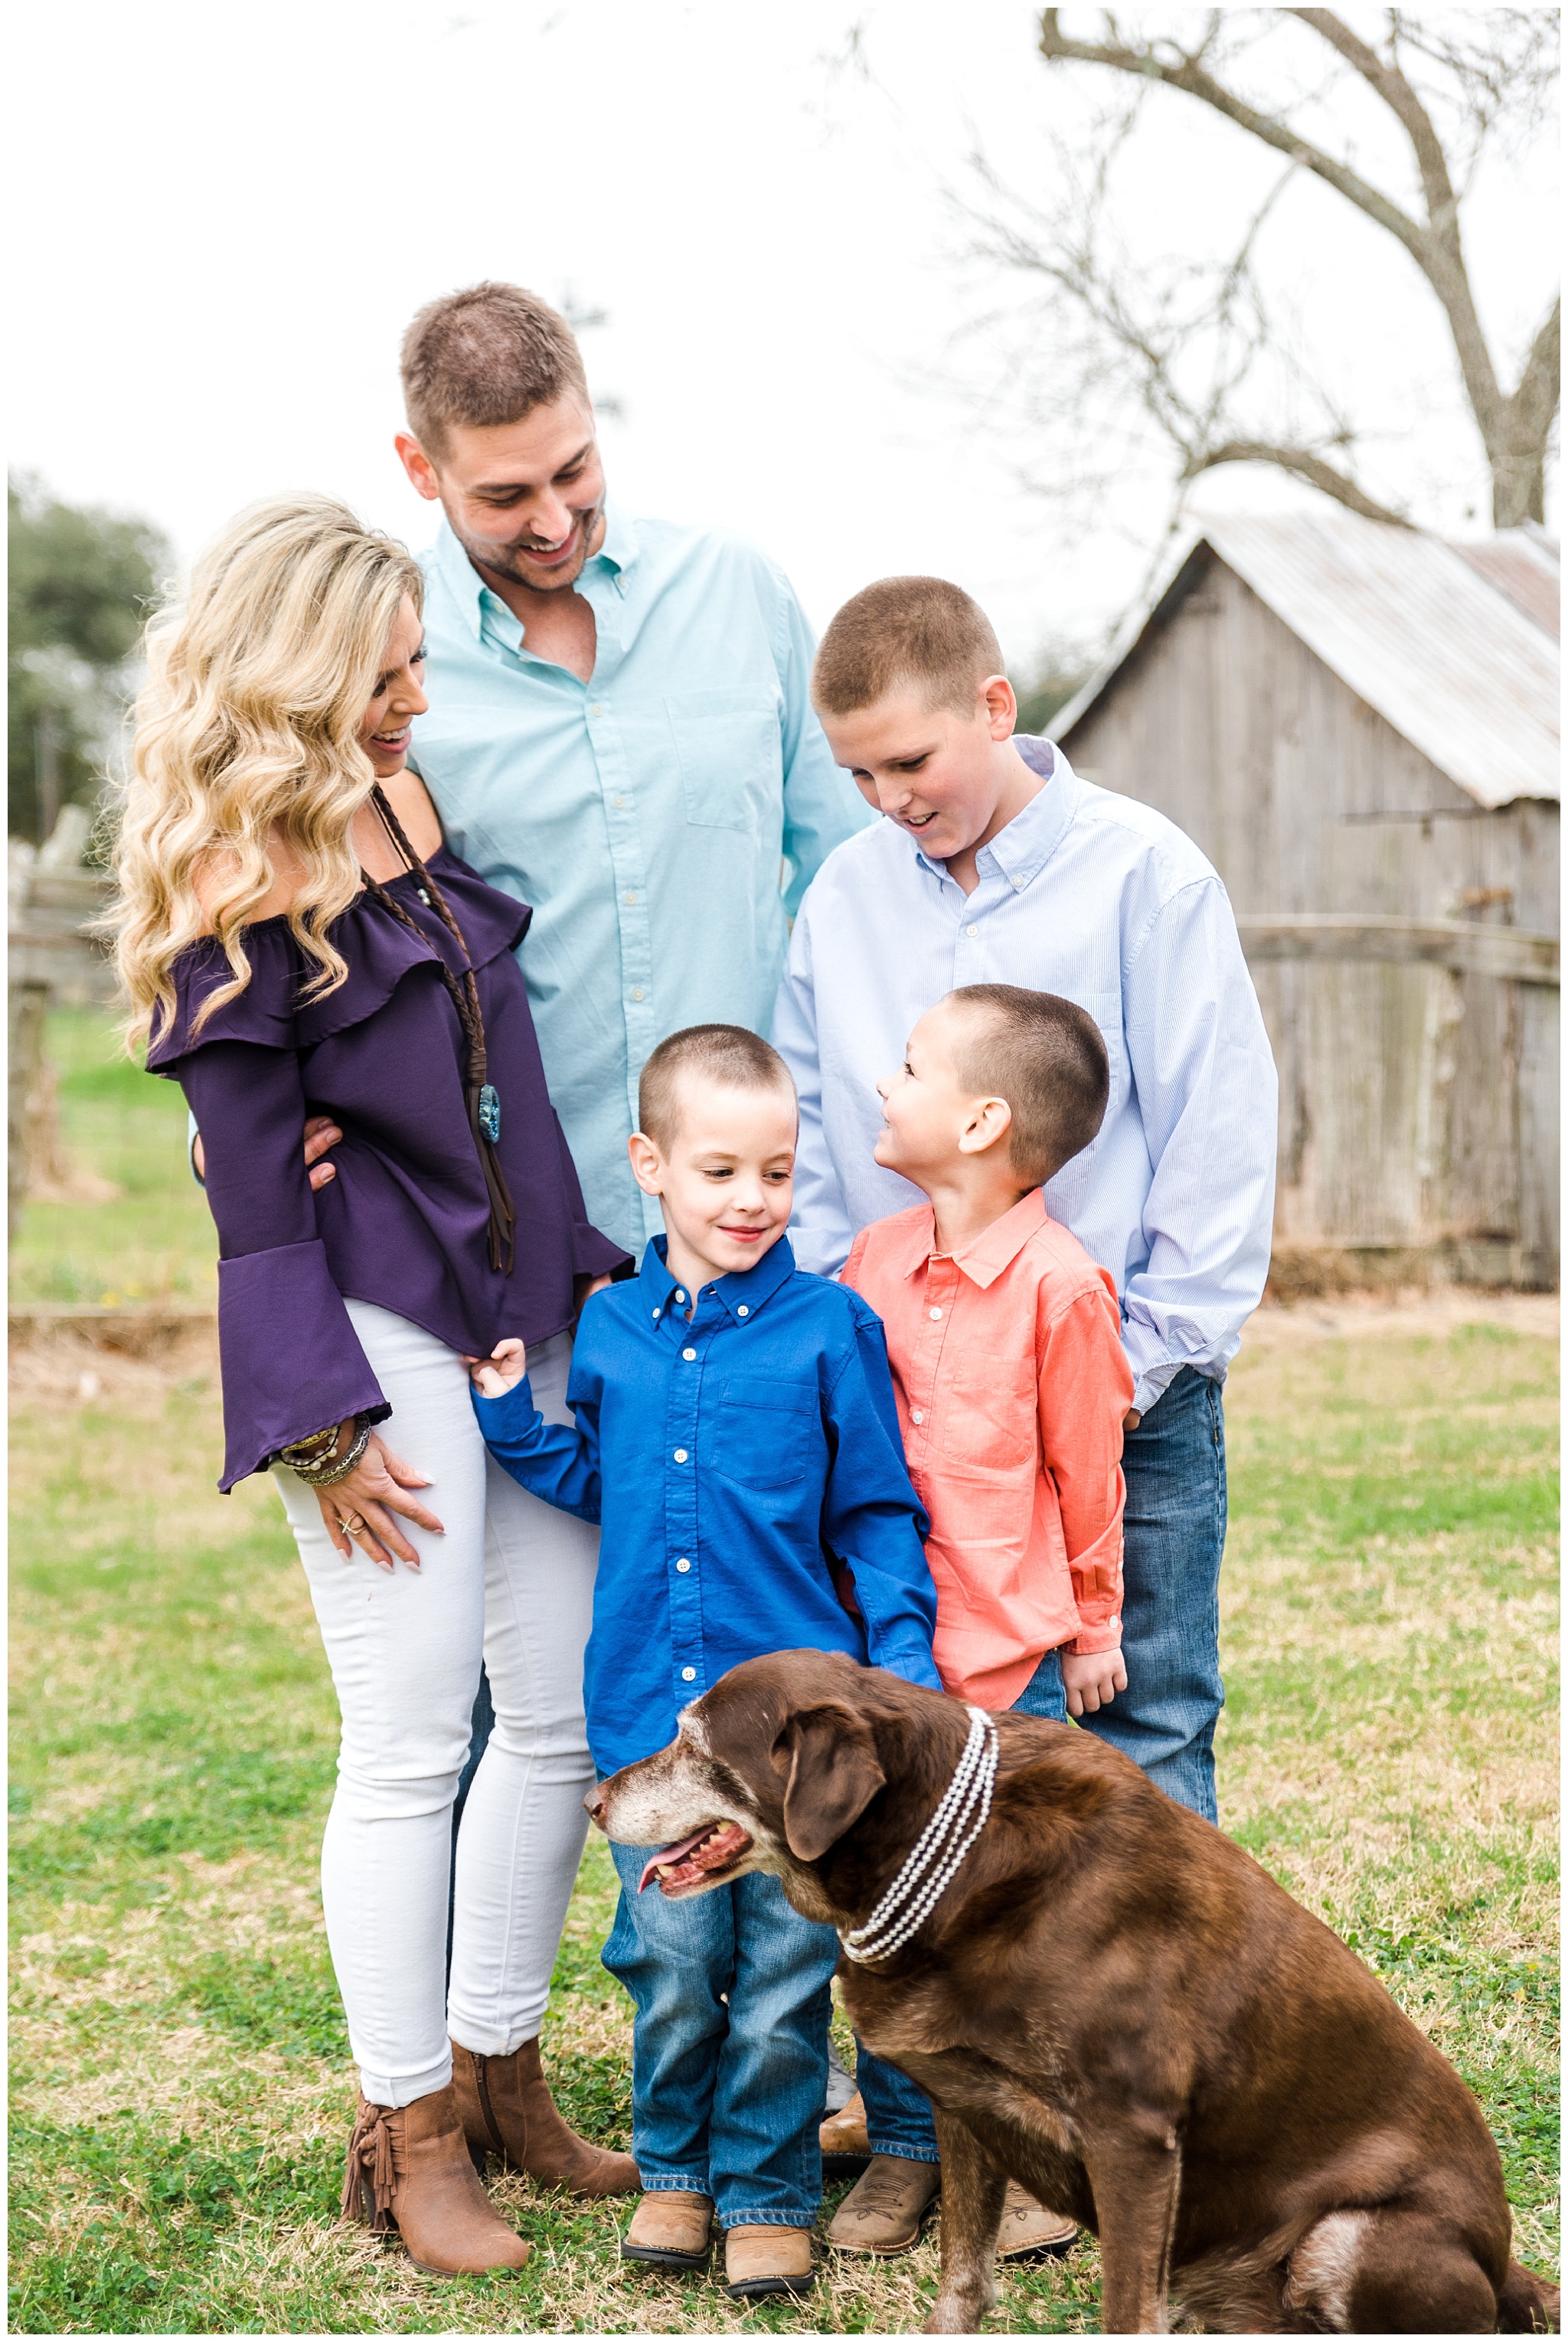 Small Town Texas Family Photography Session_2017-02-12_0007